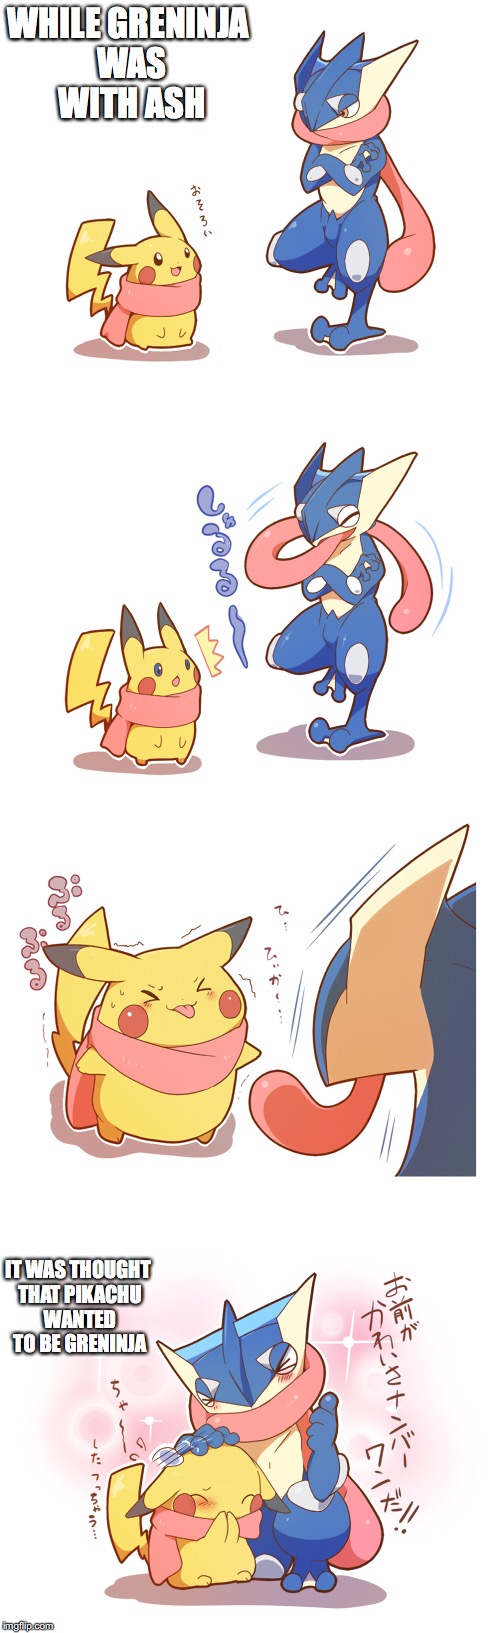 Pikachu and Greninja | WHILE GRENINJA WAS WITH ASH; IT WAS THOUGHT THAT PIKACHU WANTED TO BE GRENINJA | image tagged in pikachu,greninja,memes,pokemon | made w/ Imgflip meme maker